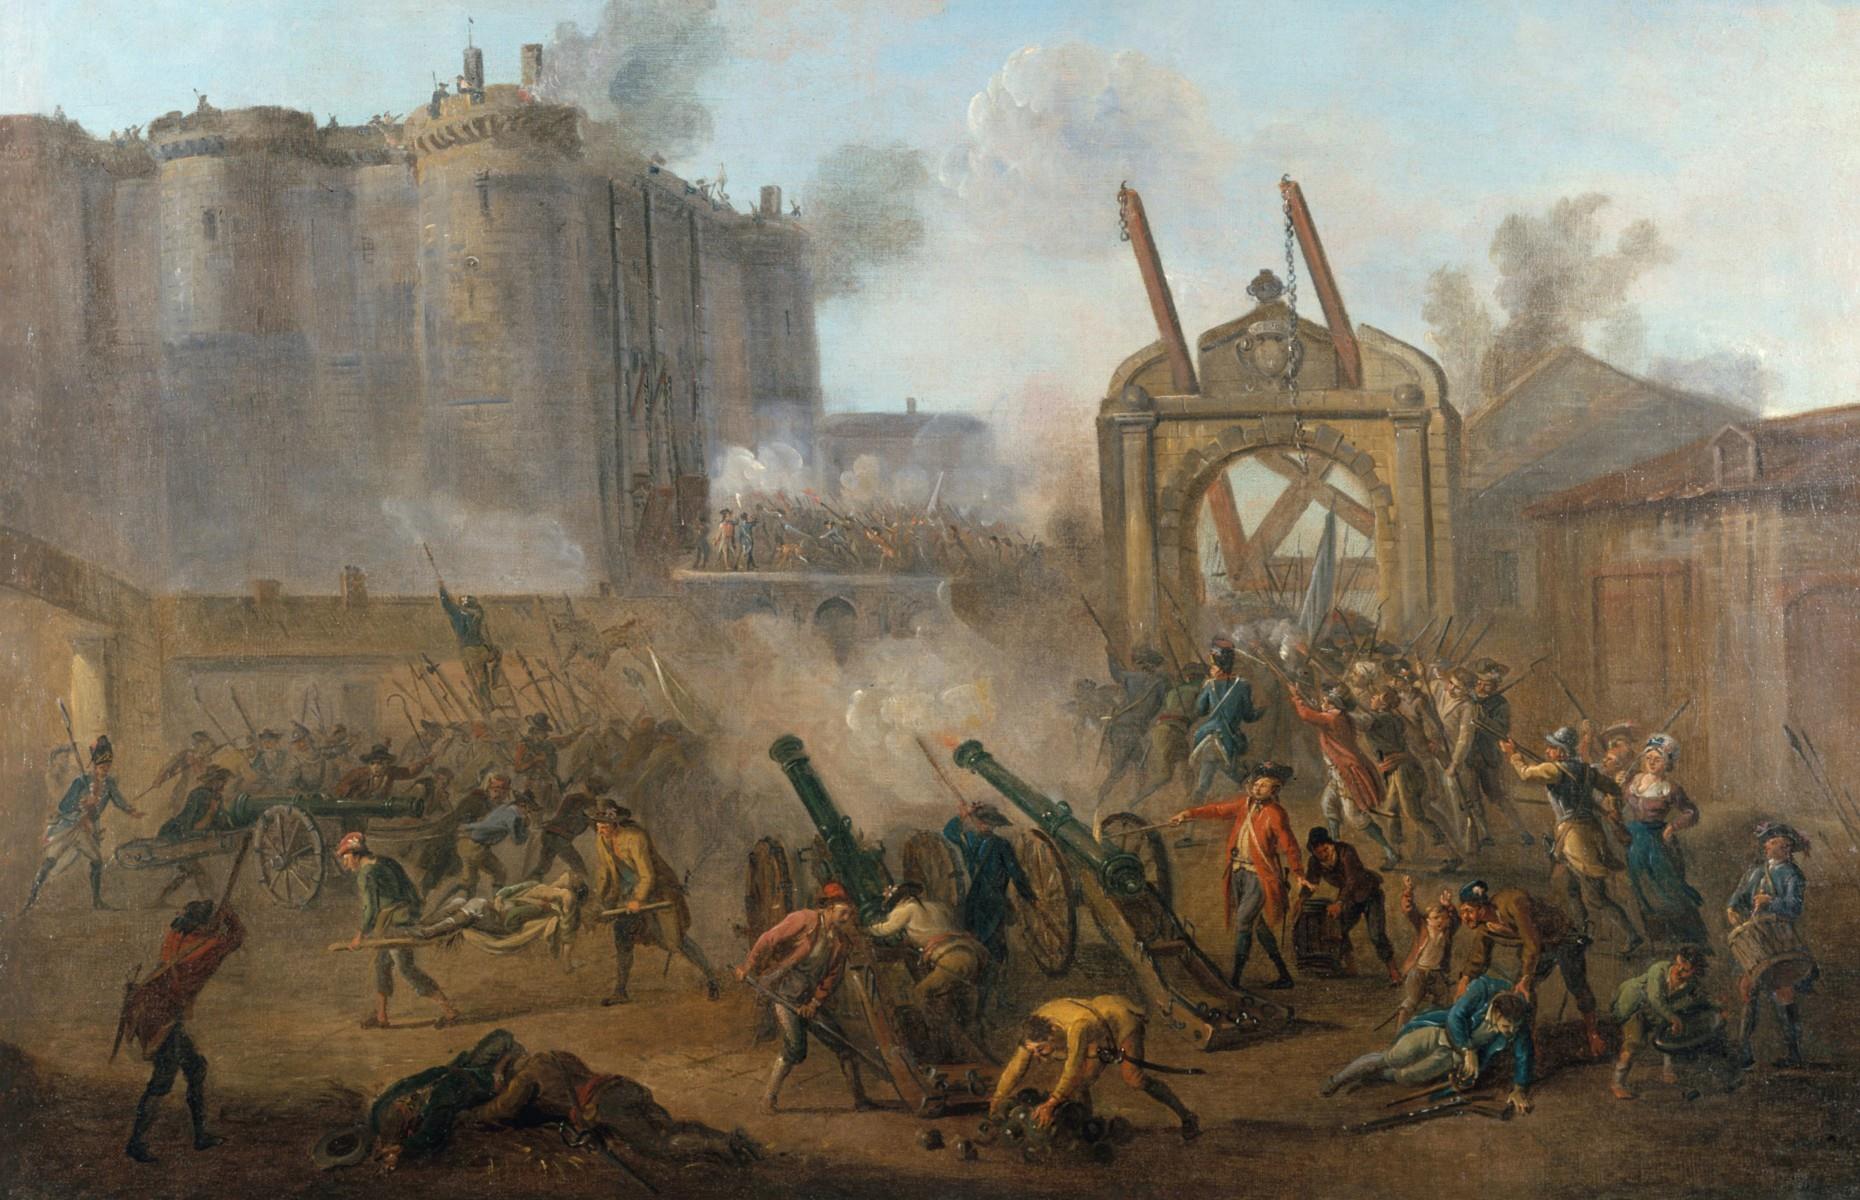 <p>The <em>Mona Lisa</em> remained in French palaces for hundreds of years until insurgents claimed the royal collection as the property of the French people during the French Revolution between 1787 and 1799. The painting went on permanent display in the Louvre in 1797, though it did spend a brief period hanging in Napoleon's bedroom.</p>